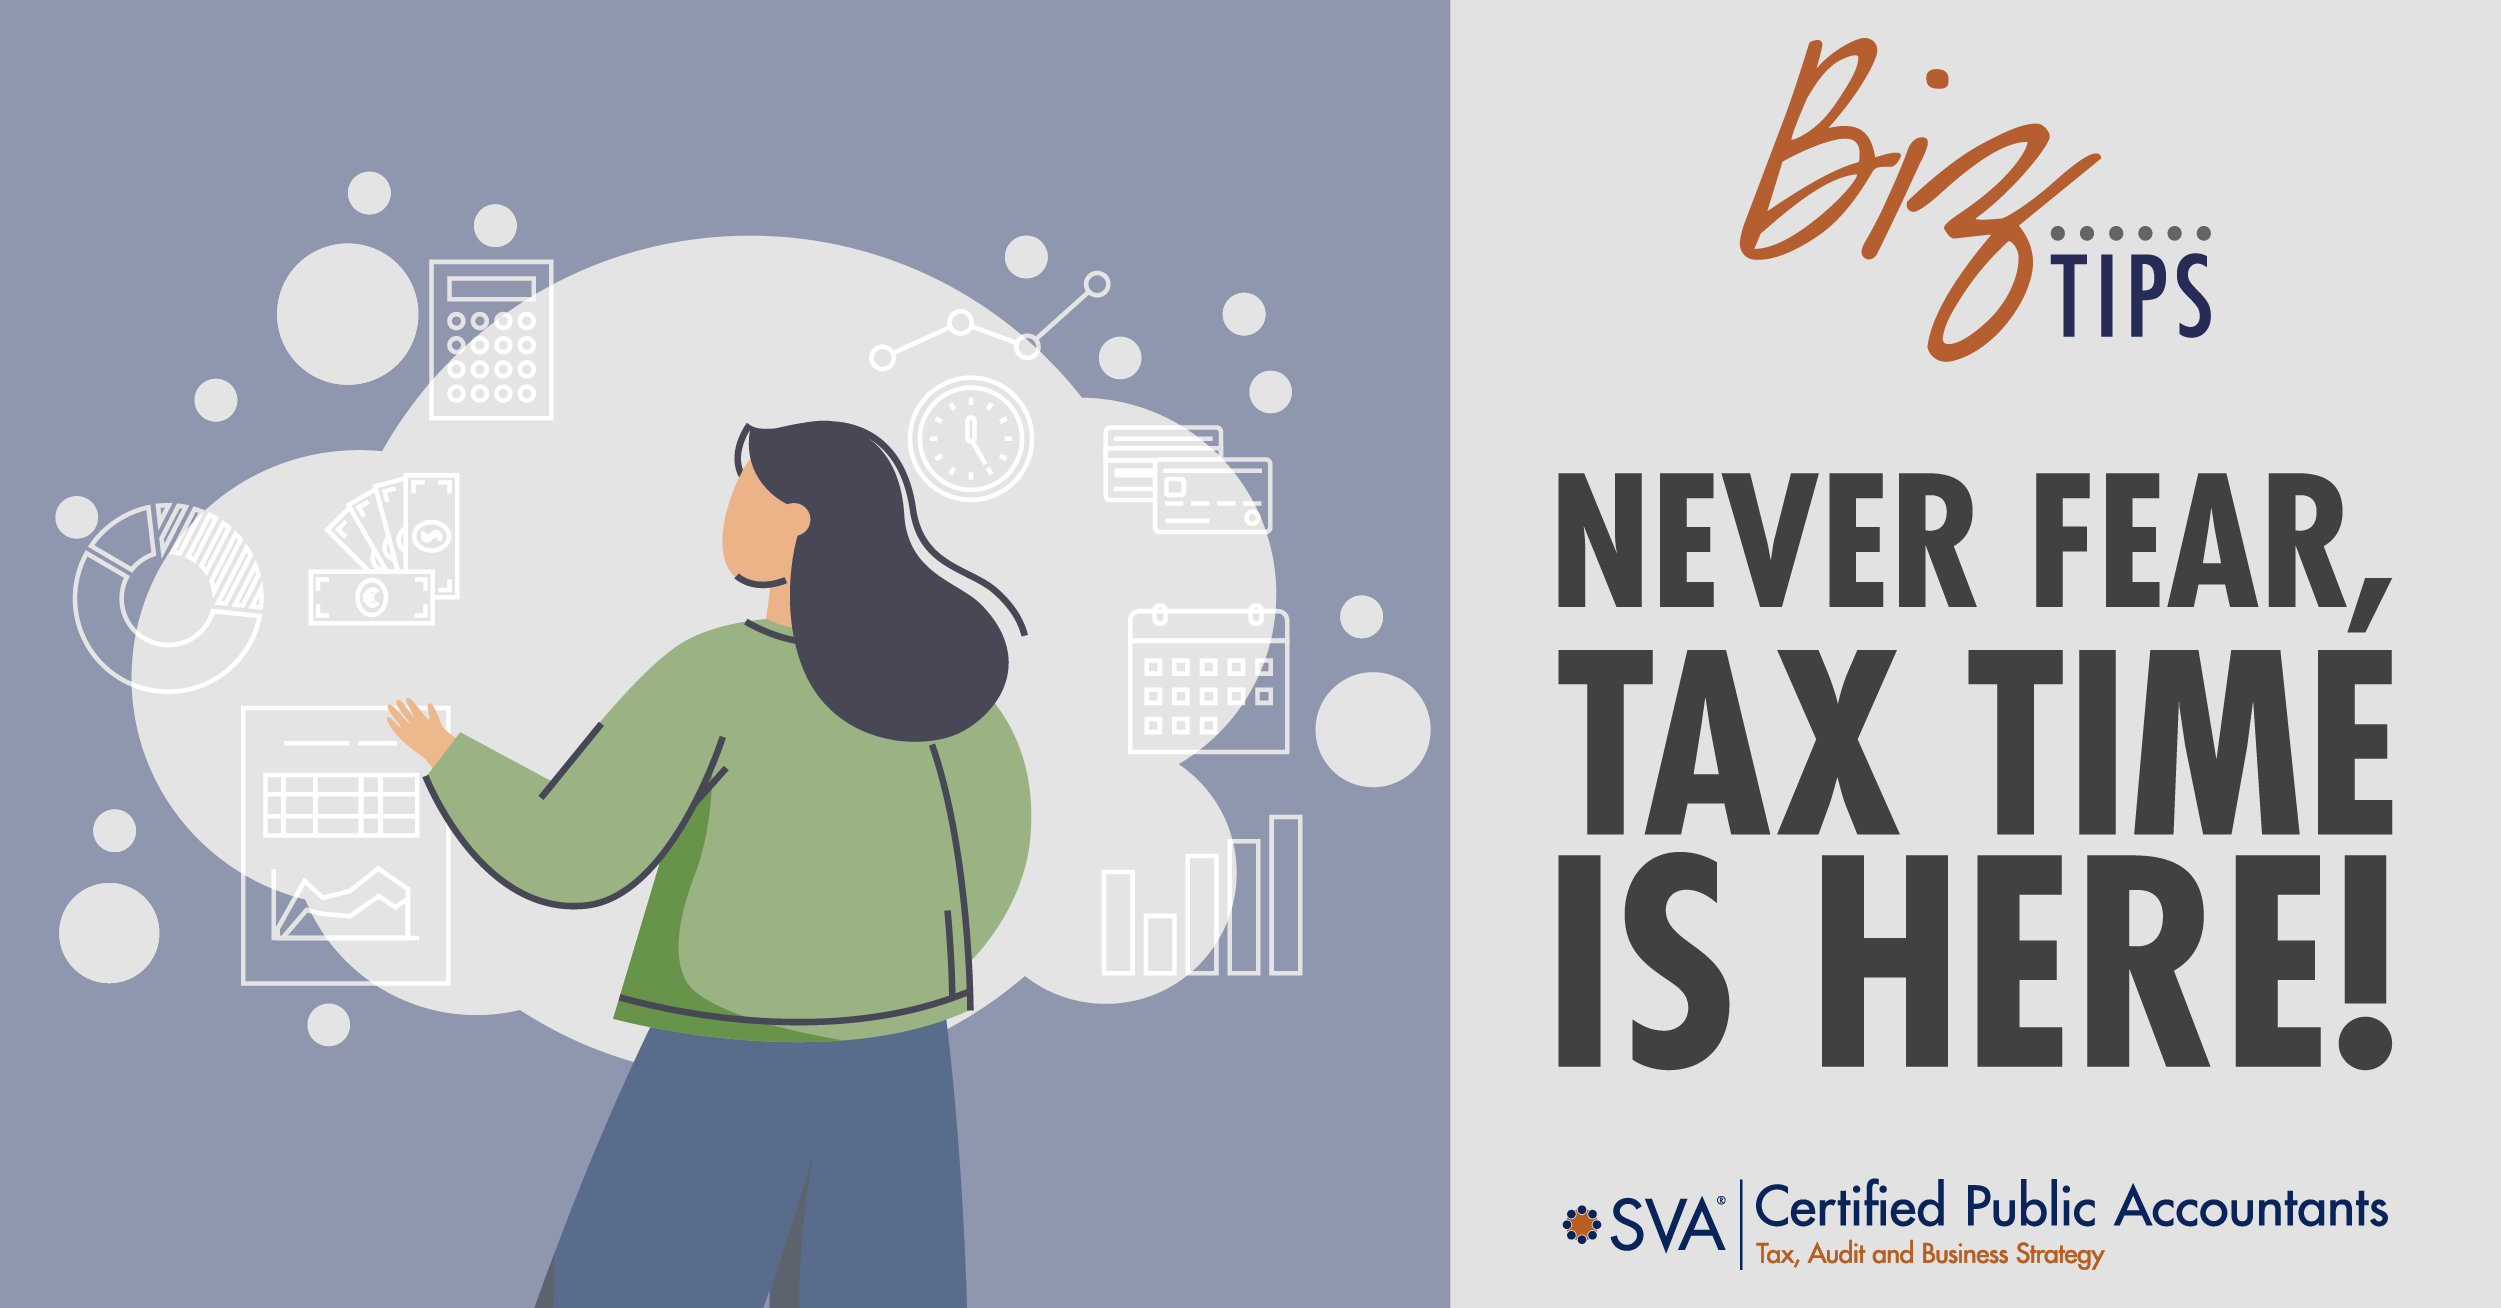 Never Fear, Tax Time is Here!